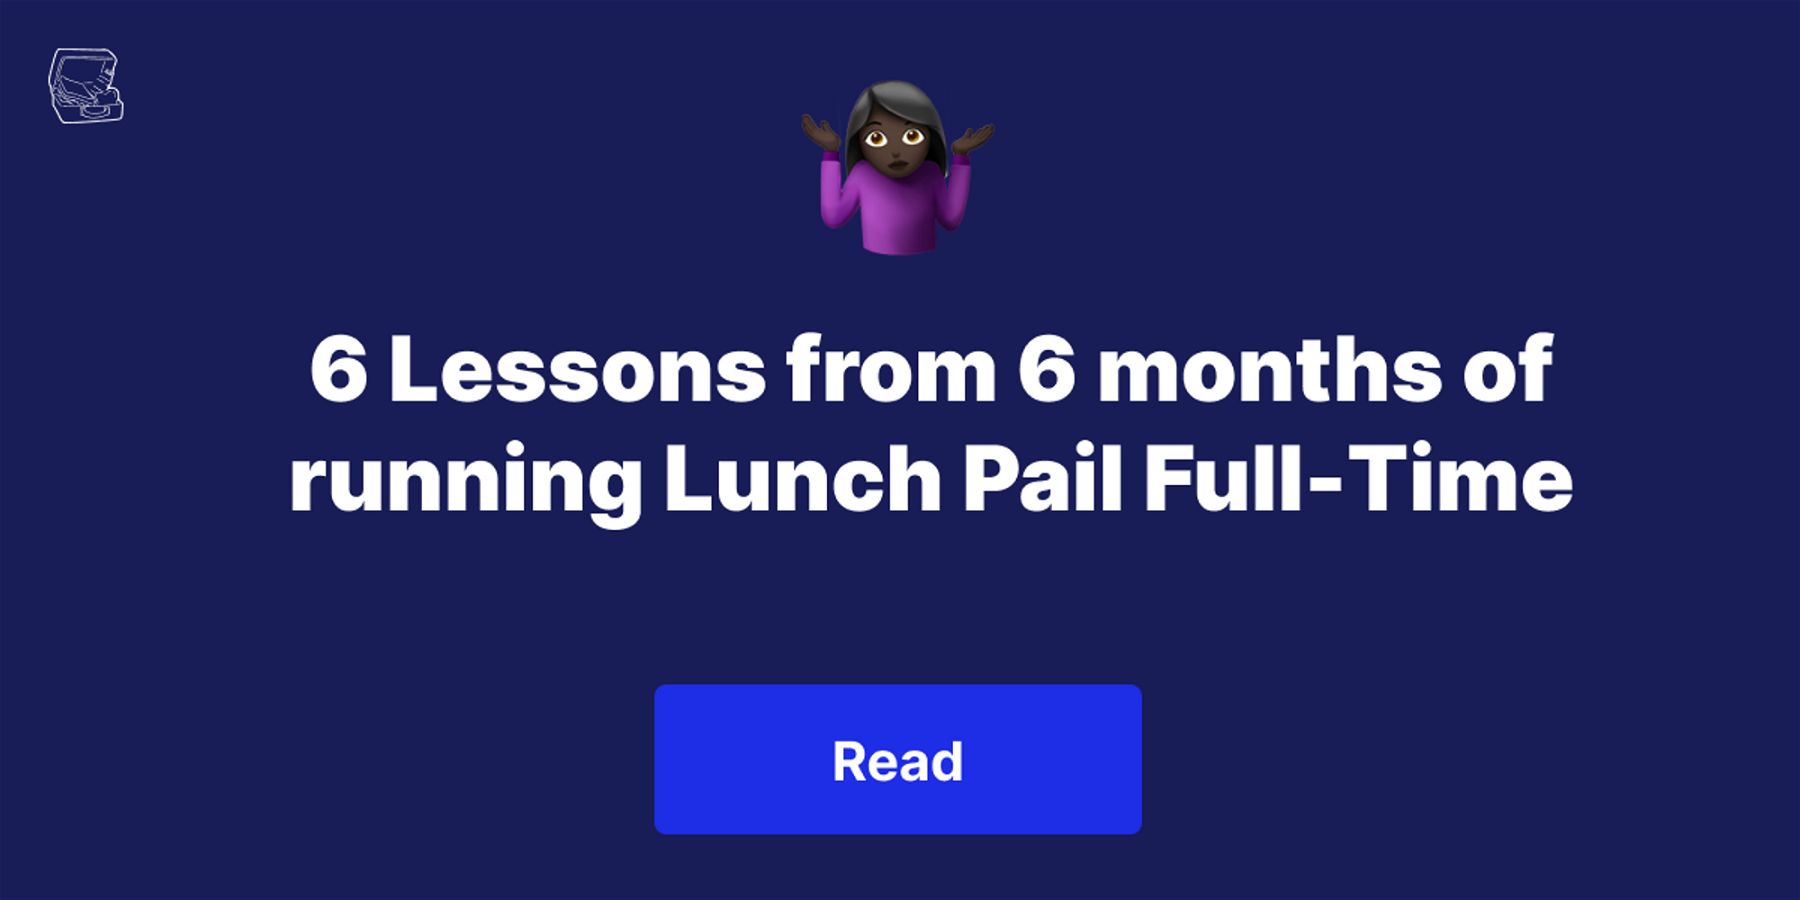 6 Lessons from 6 months of running Lunch Pail Full-Time